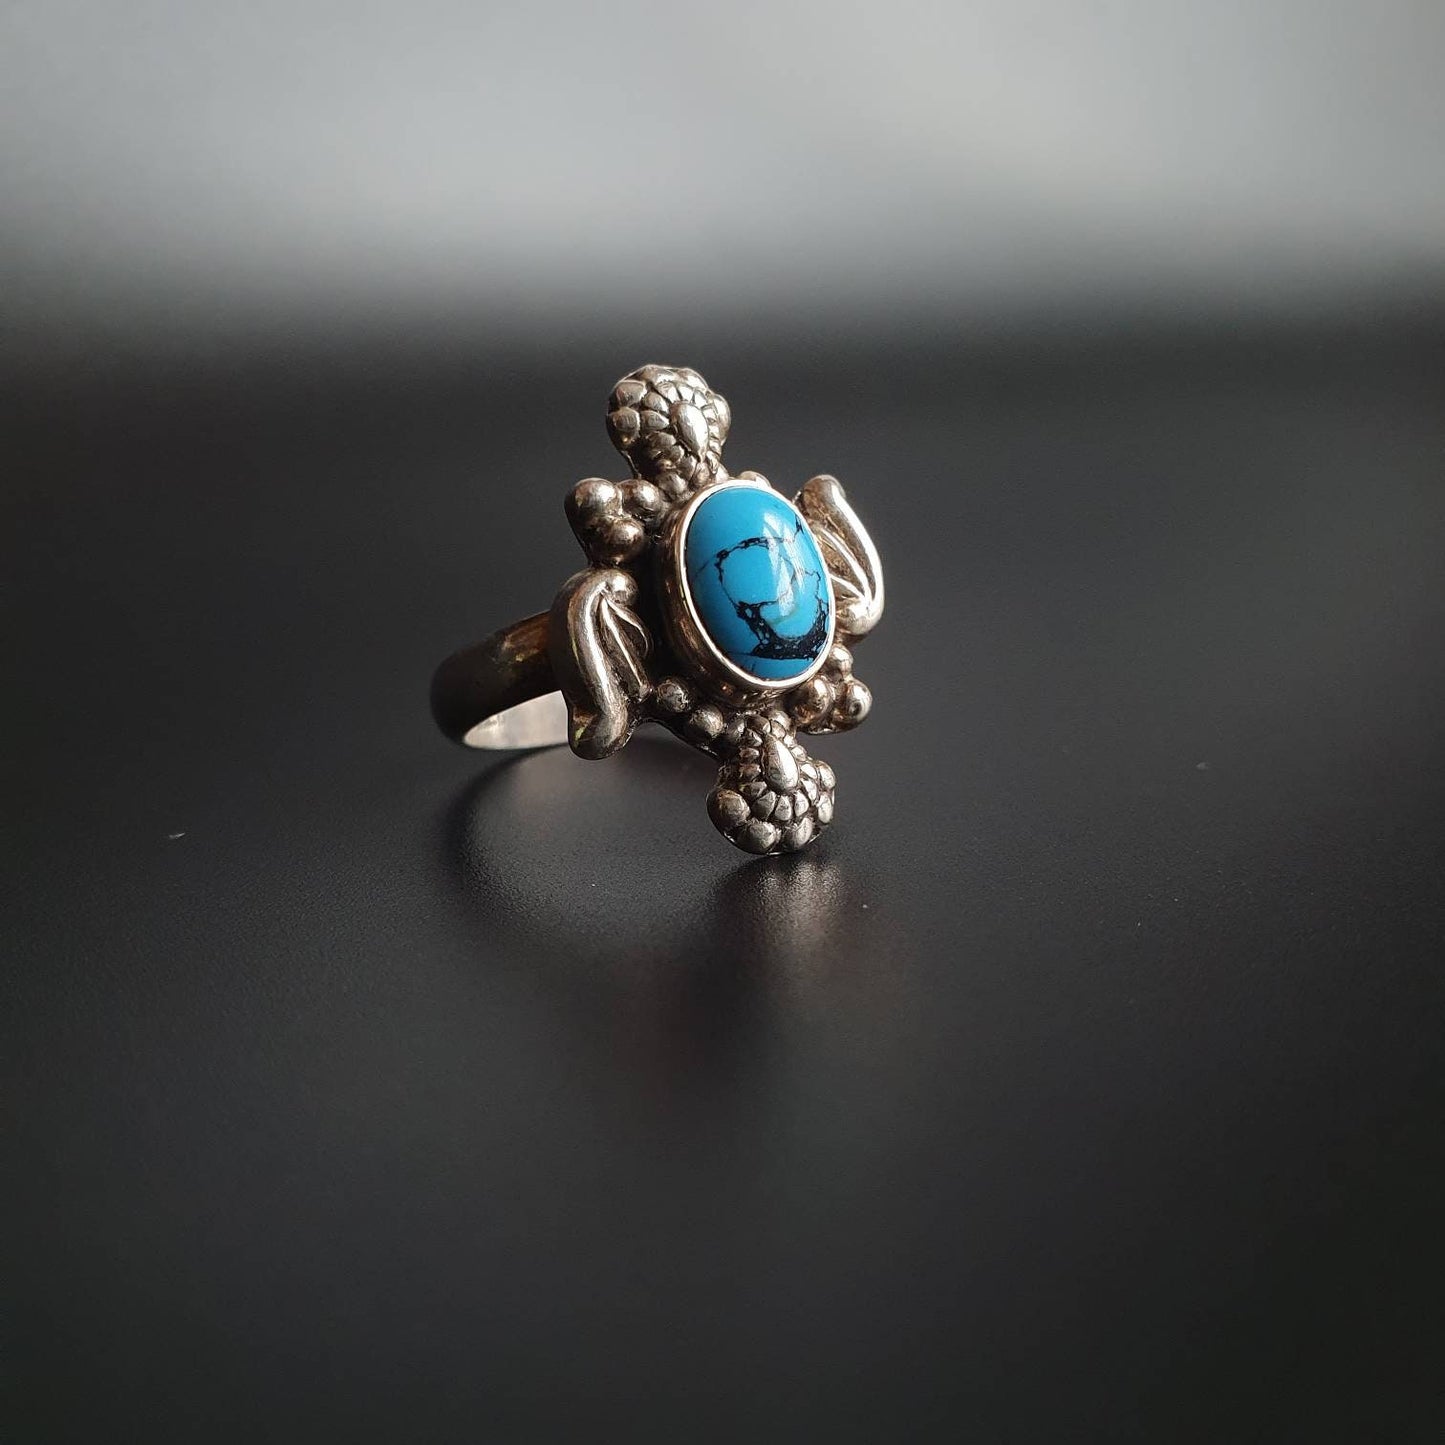 Turquoise ring, Navajo, unique traditional ring, handcrafted, spiritual organic collectibles, authentic craftsmanship,artisanal ring